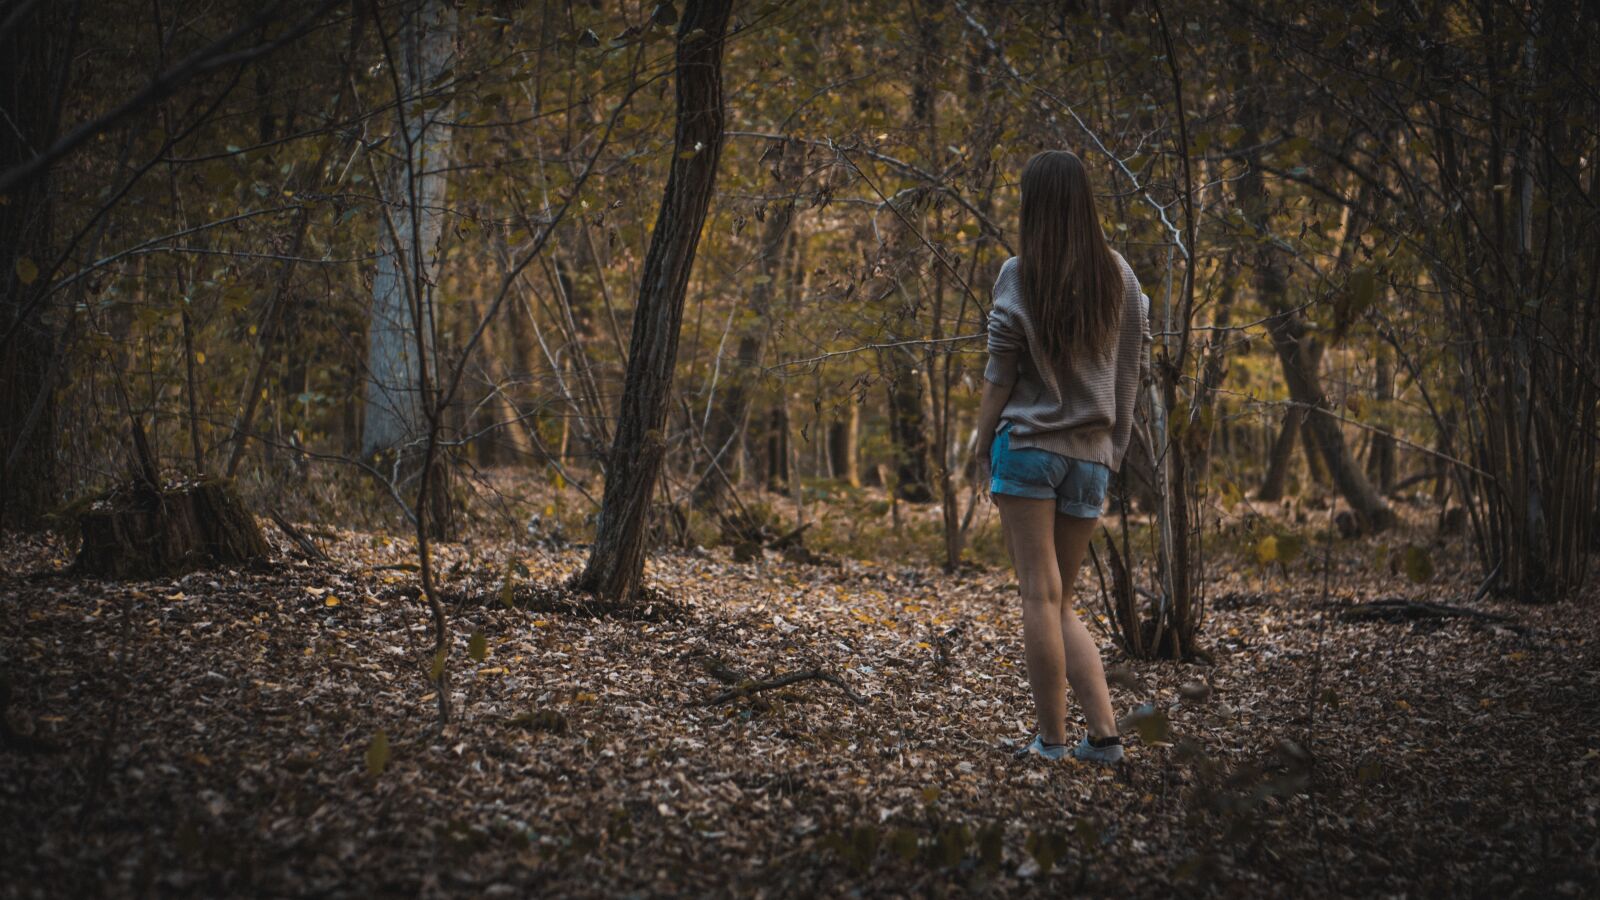 Sony a6300 sample photo. Forest, girl, hiking photography